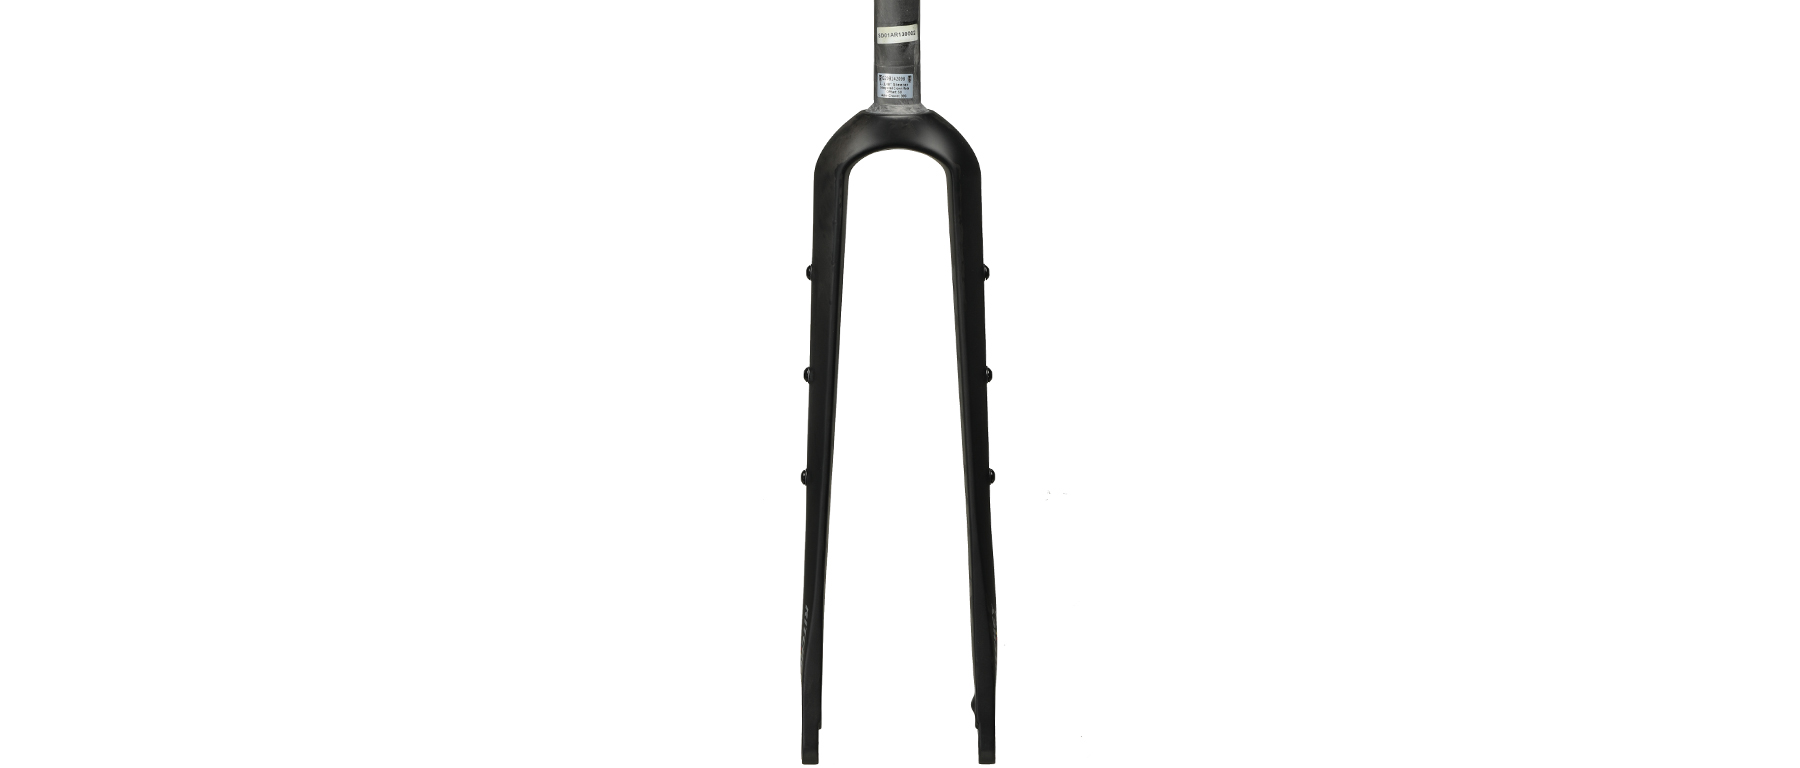 Ritchey WCS Carbon Adventure Disc Fork